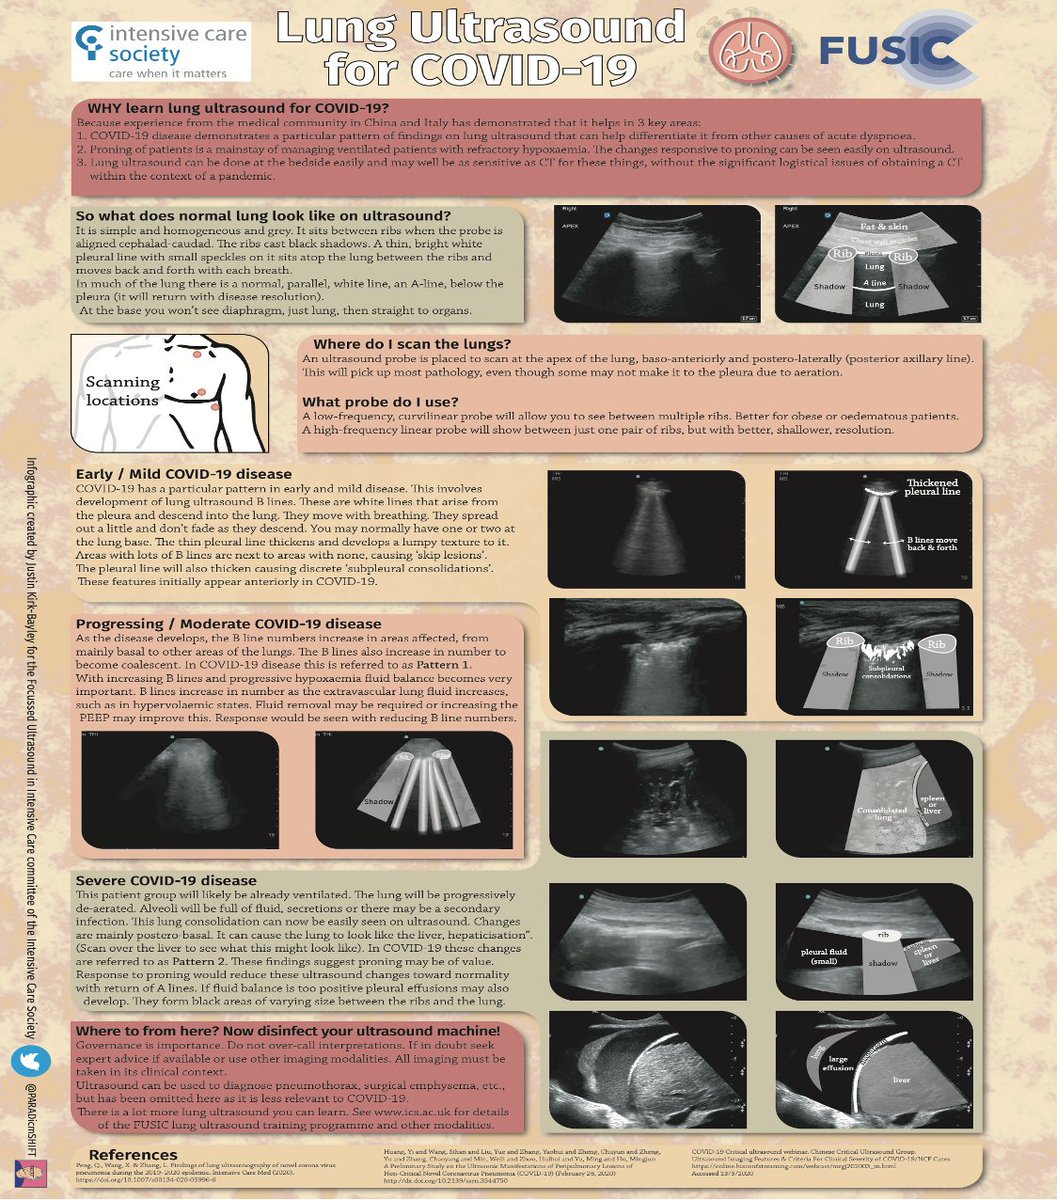 6/10 Lung ultrasound has been proving its worth in  #pocusforcovid. Some essential resources  #BARA2020  http://www.ics.ac.uk/ICS/ICS/FUSIC/FUSIC_COVID-19.aspx …https://associationofanaesthetists-publications.onlinelibrary.wiley.com/doi/10.1111/anae.15082  https://academic.oup.com/ehjcimaging/article/21/9/941/5855021